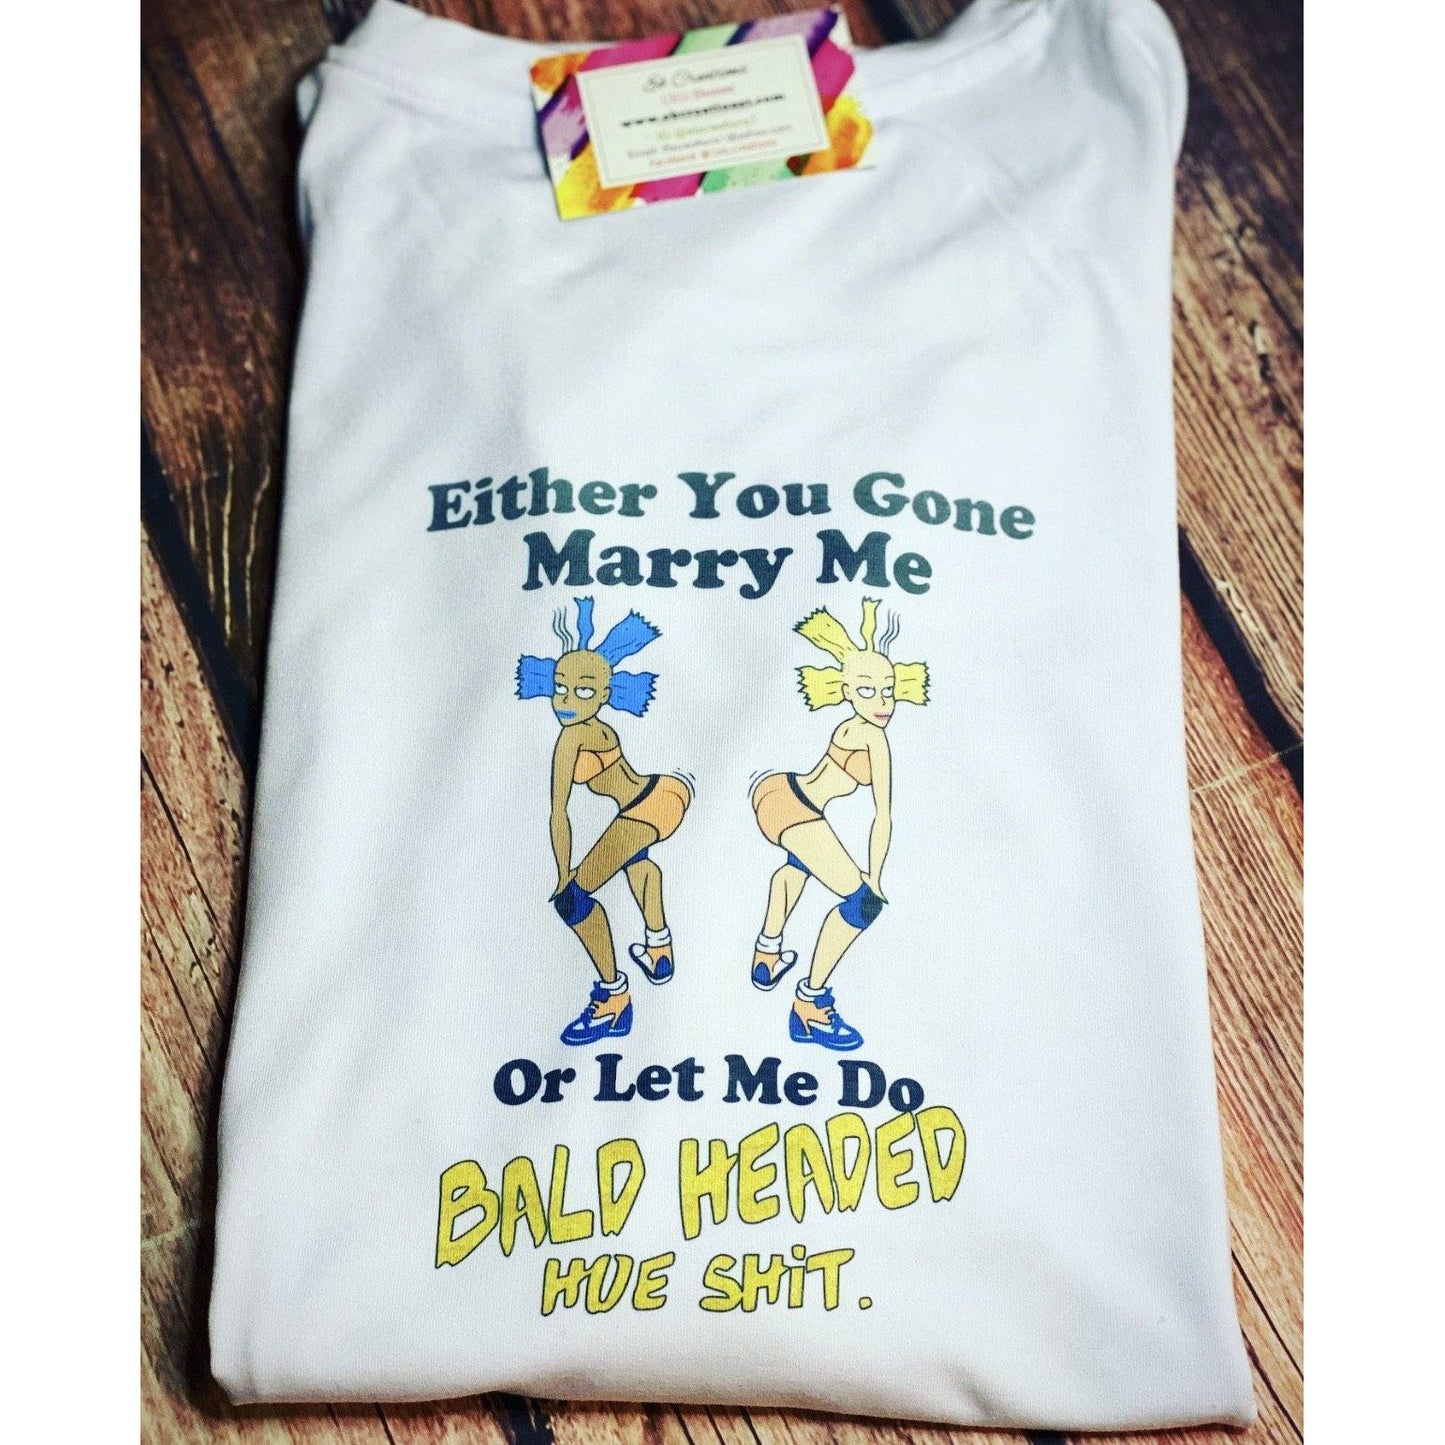 Either you gone marry me or let me do bald headed hoe shit T-Shirt - Eb Creations Either you gone marry me or let me do bald headed hoe shit T-Shirt